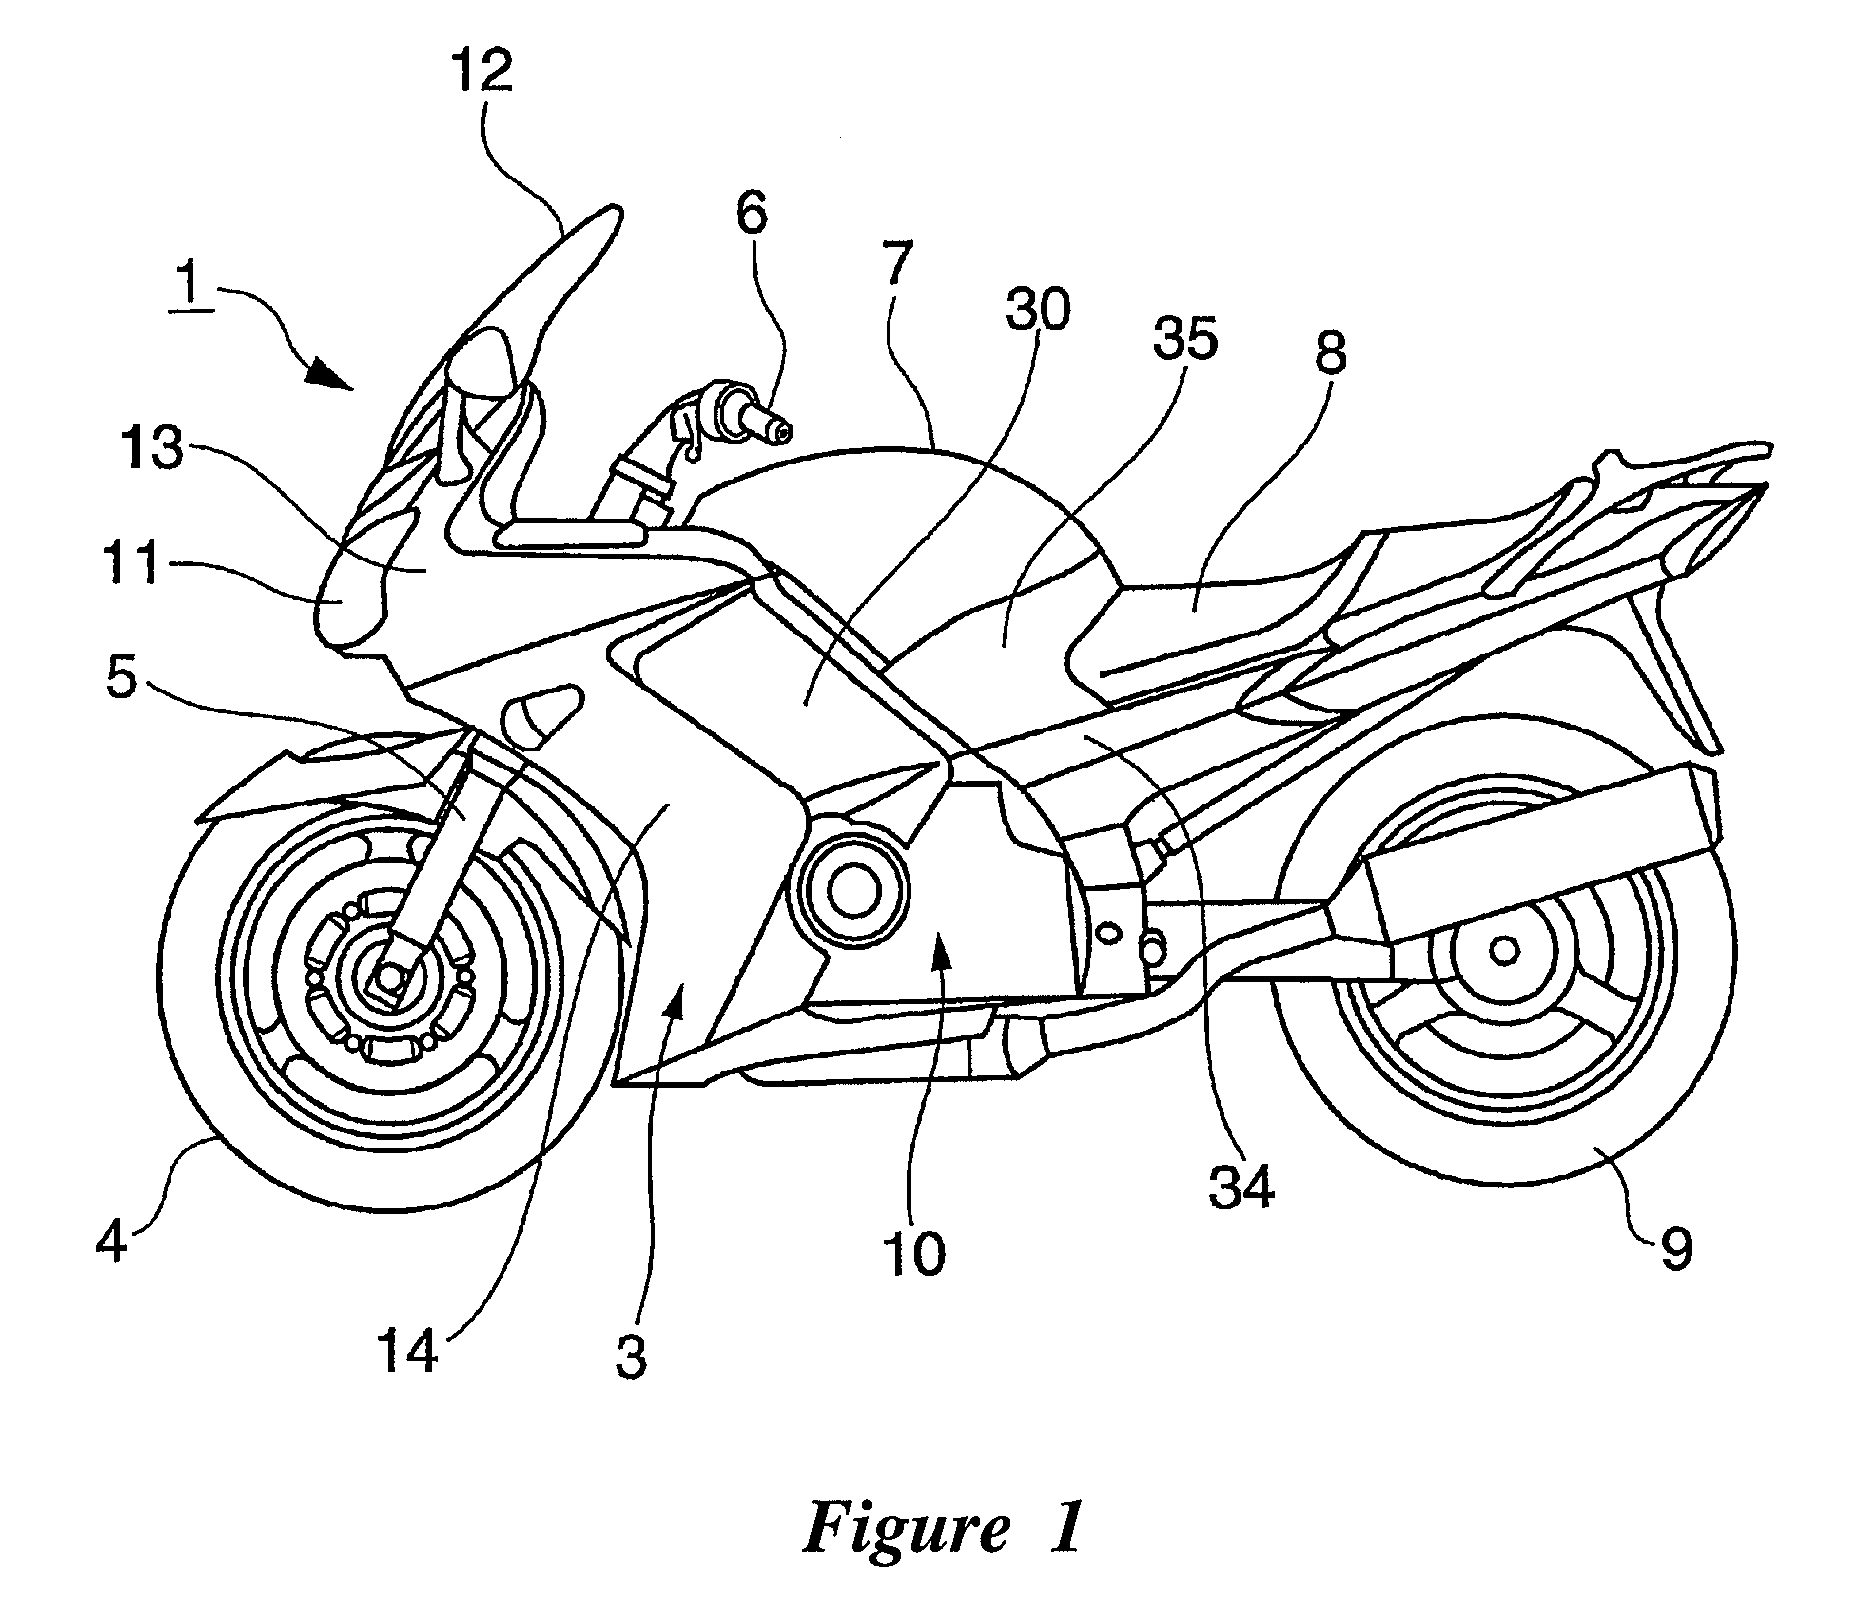 Vehicle body cooling structure for motorcycle and motorcycle